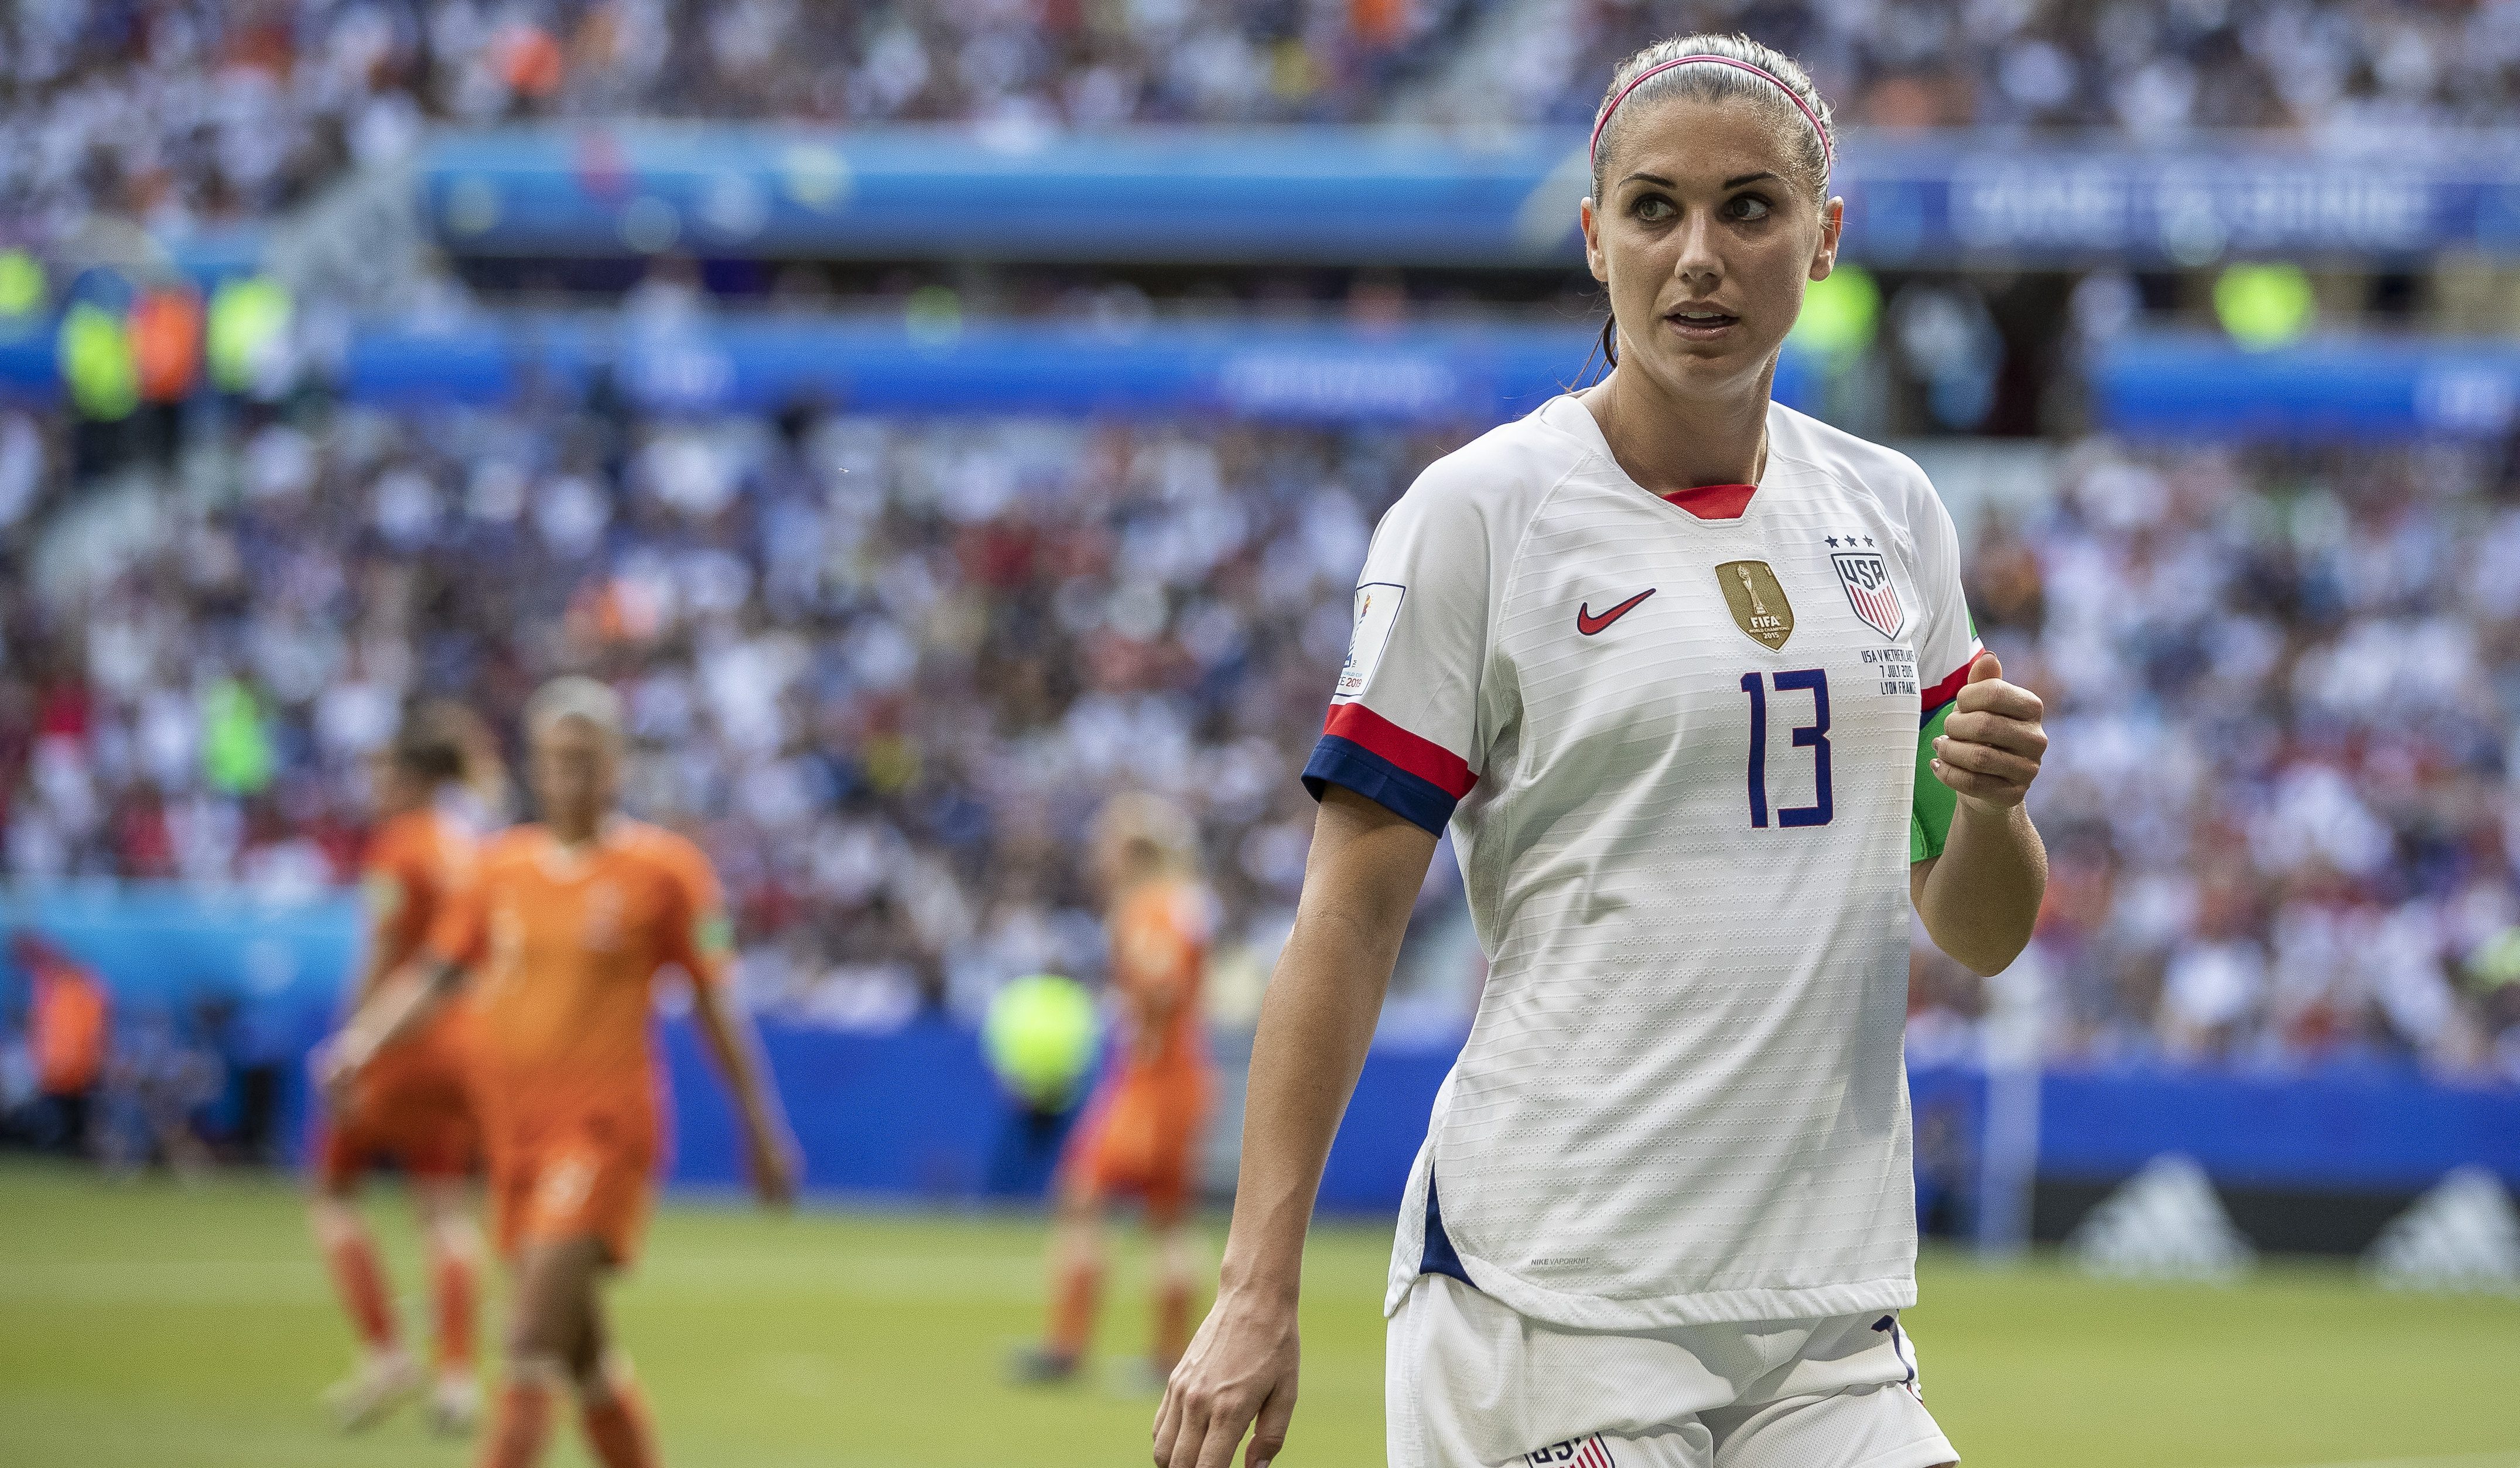 USWNT vs Netherlands 2020 Live Stream How to Watch